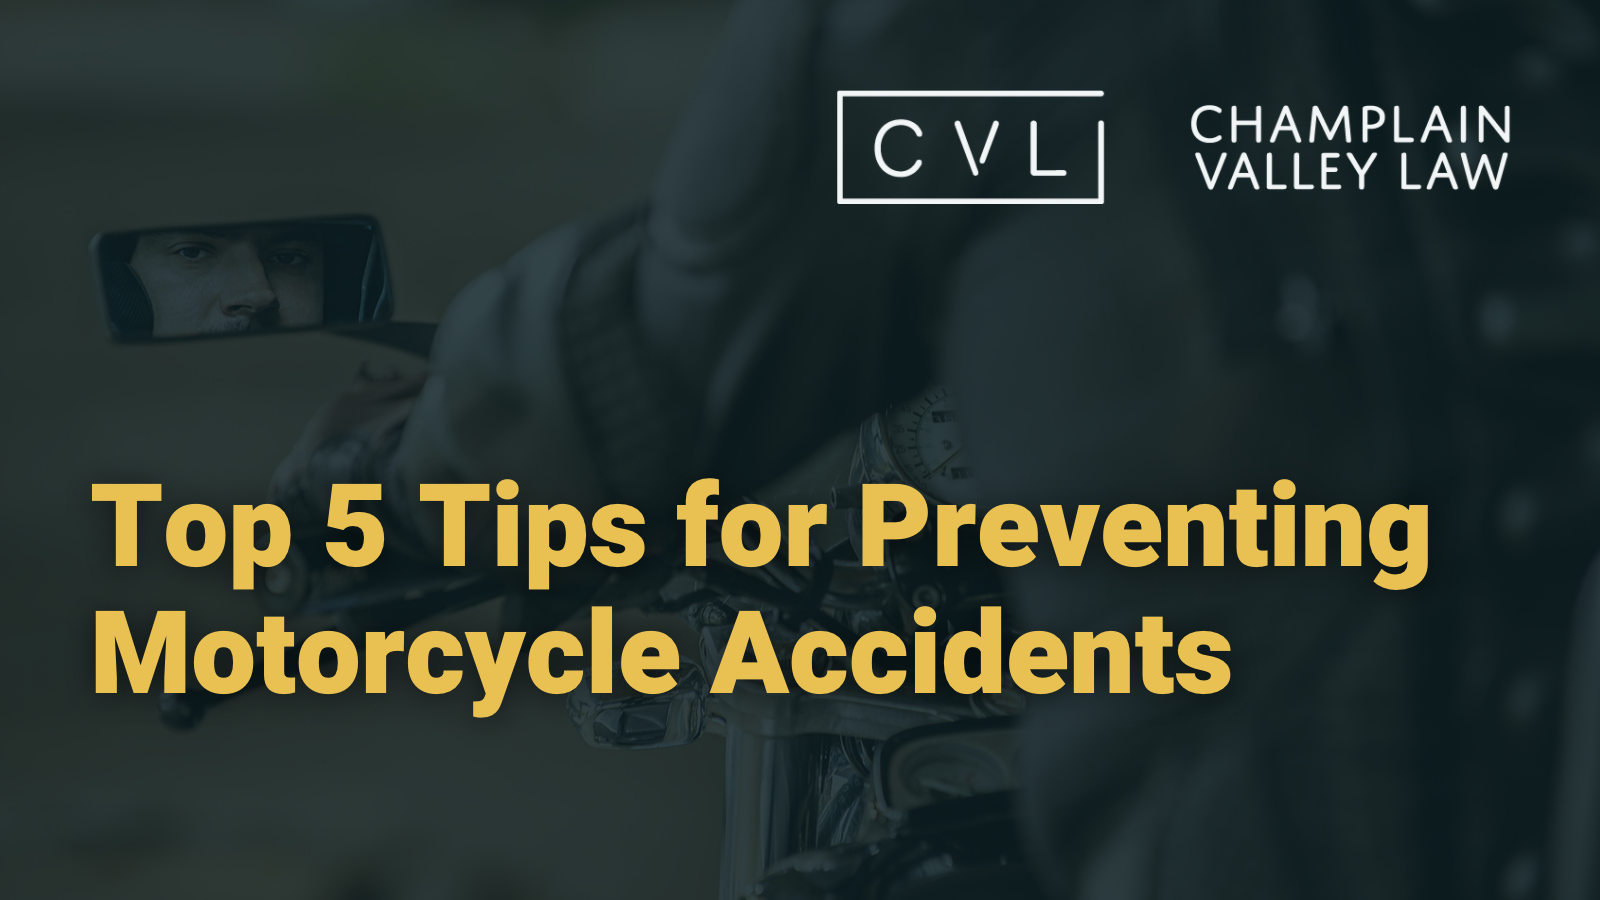 Preventing Motorcycle Accidents in vermont - Champlain Valley Law - Attorney Drew Palcsik